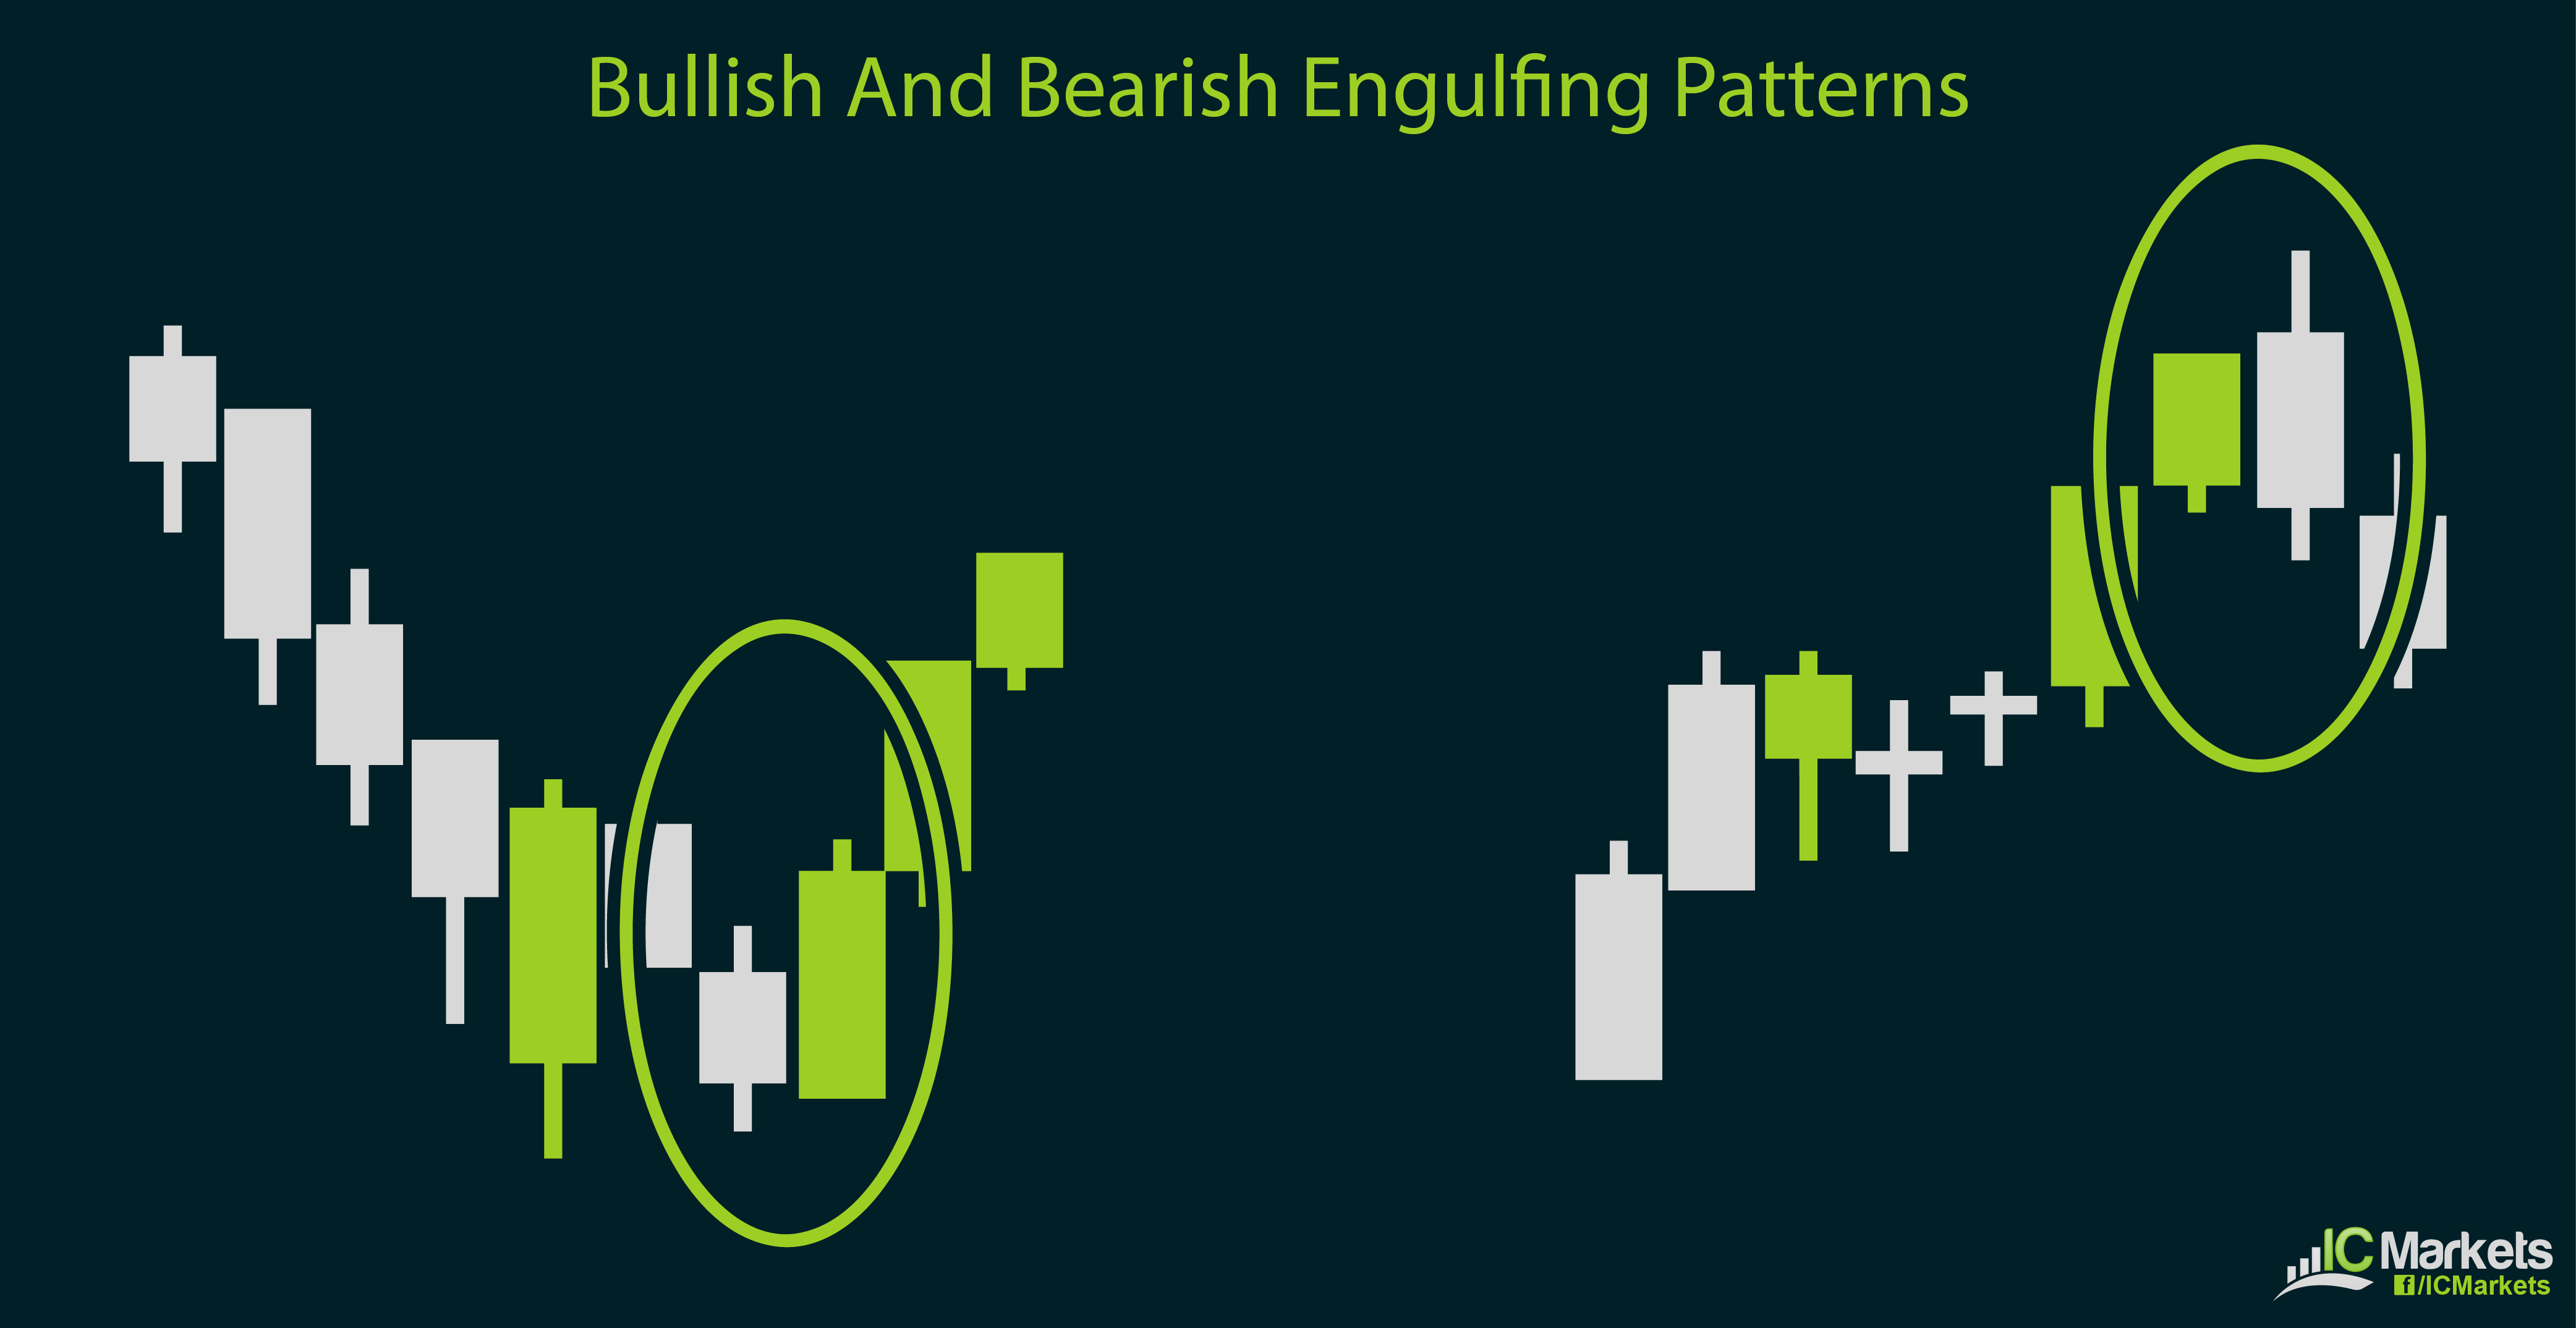 Double Candlestick Patterns